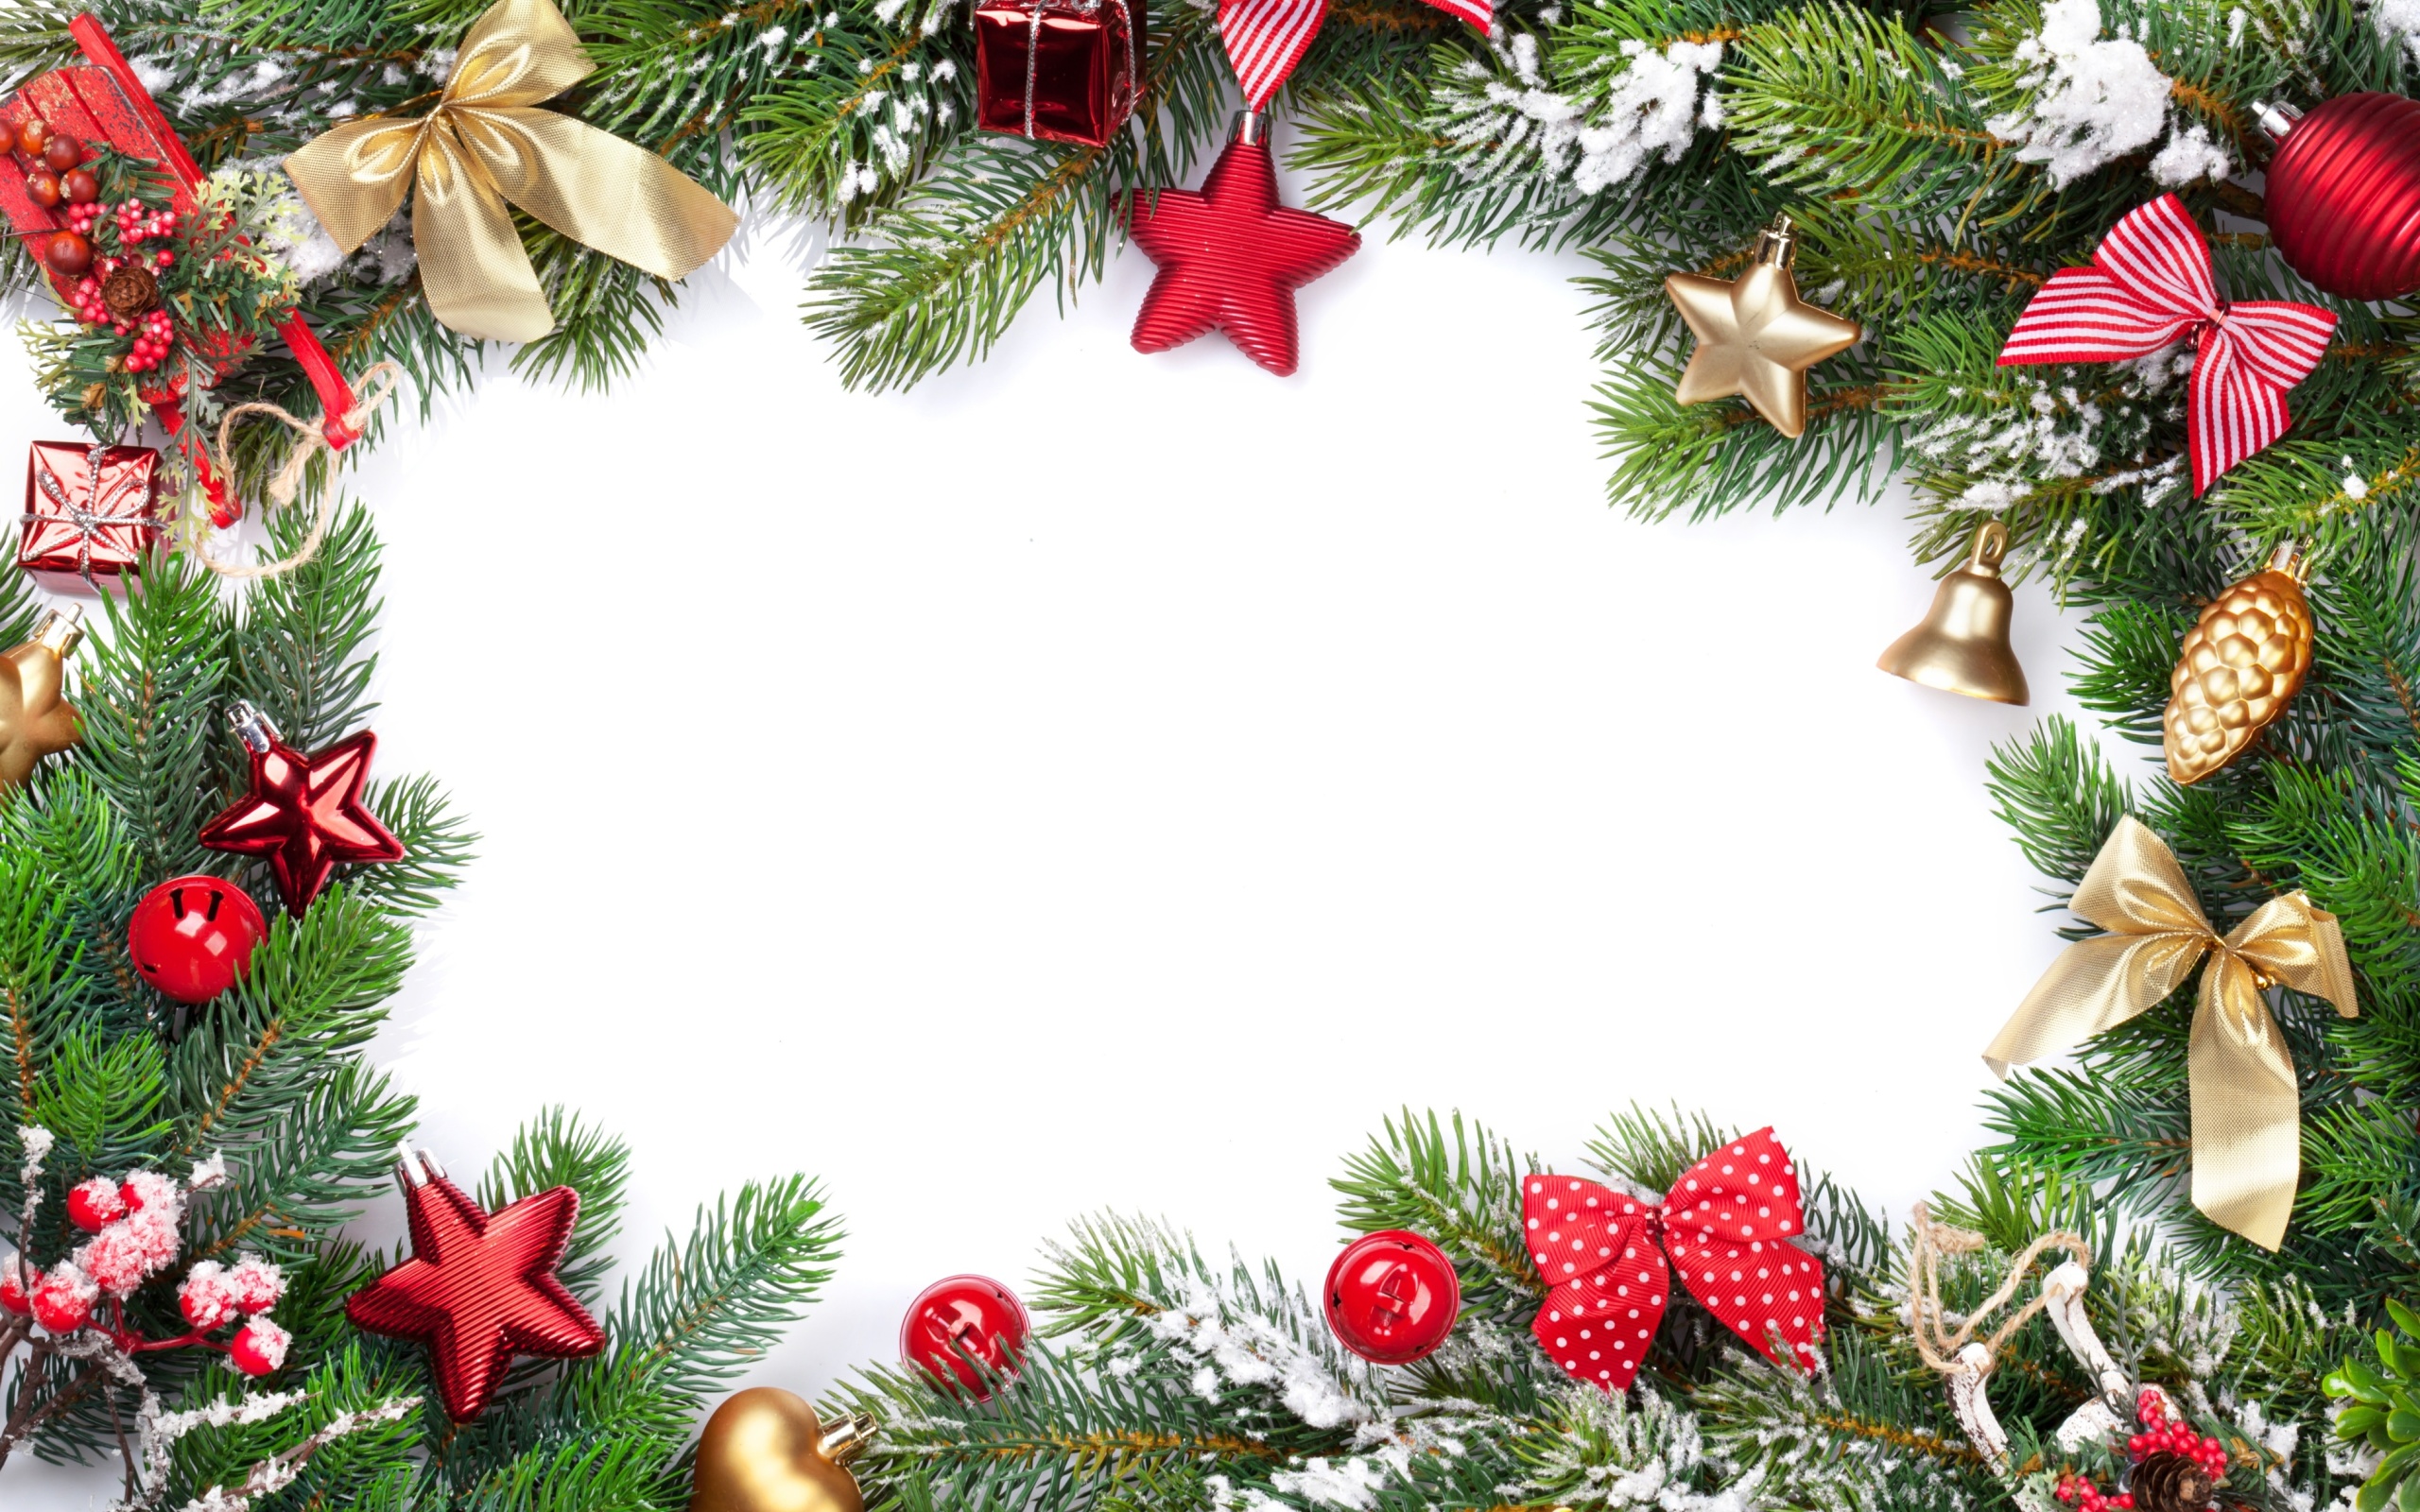 Festival decorate a christmas tree wallpaper 2560x1600